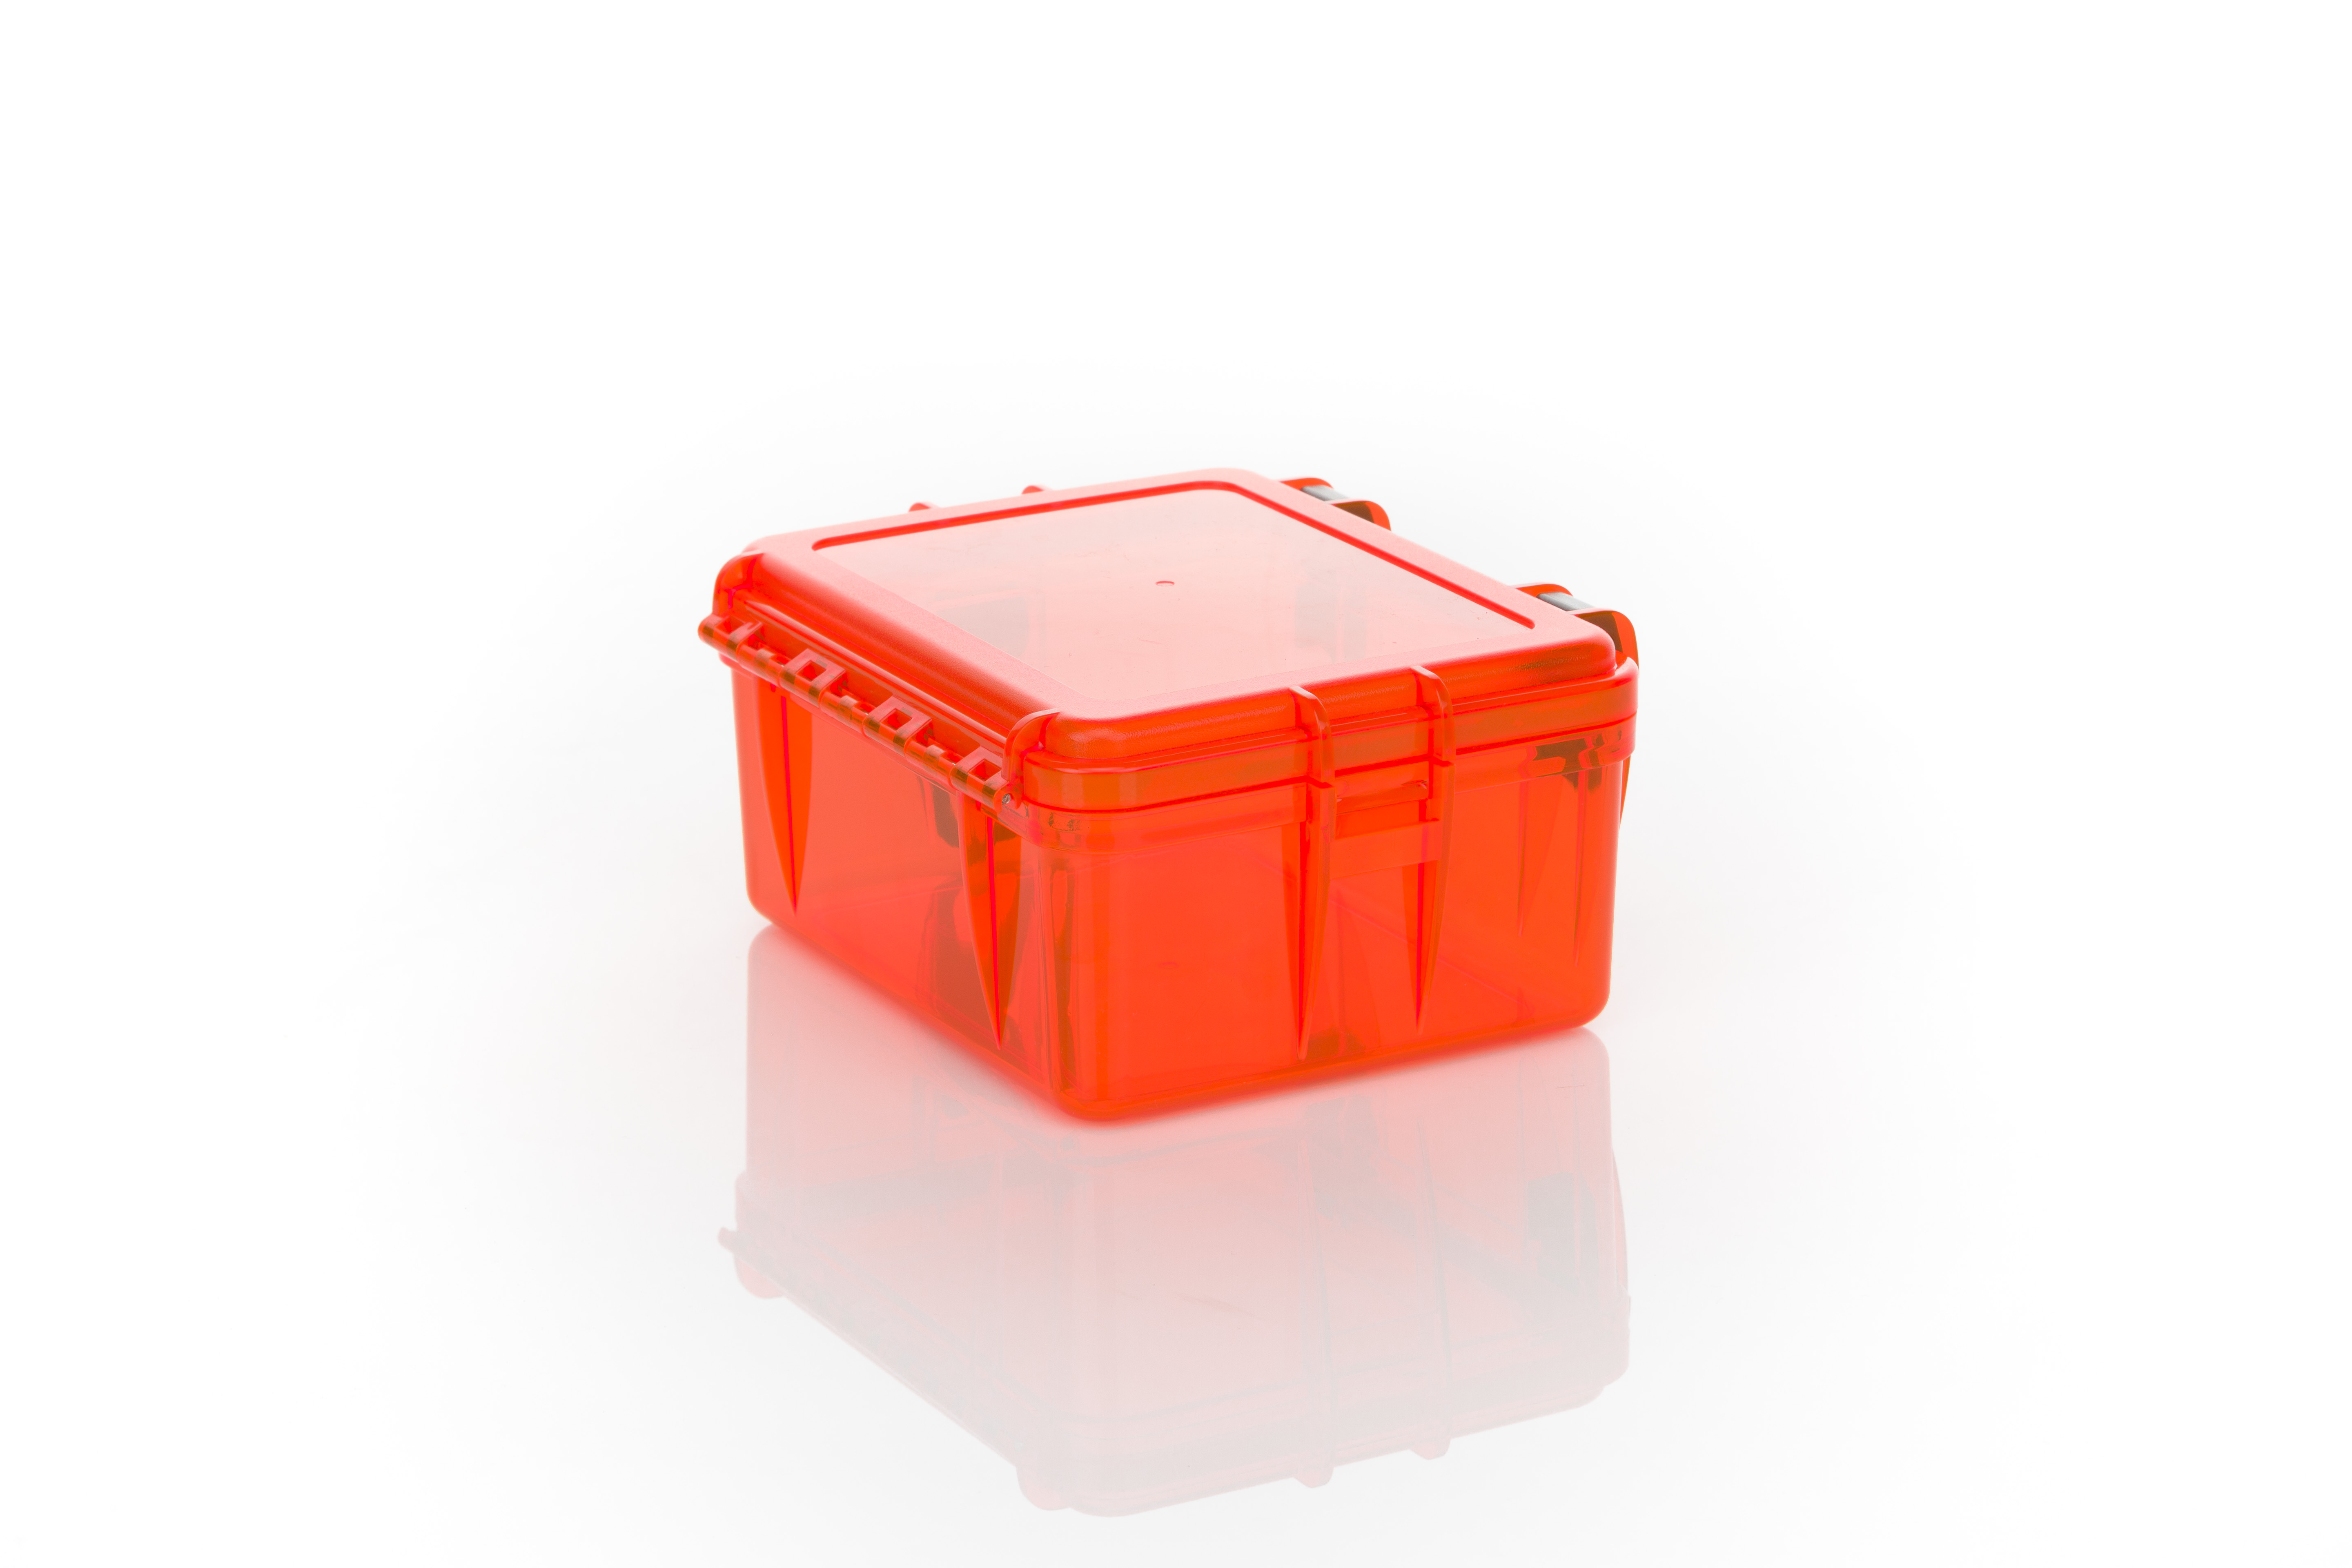 Outdoor Products Large Watertight Case Dry Box, Orange, 8 x 6.75